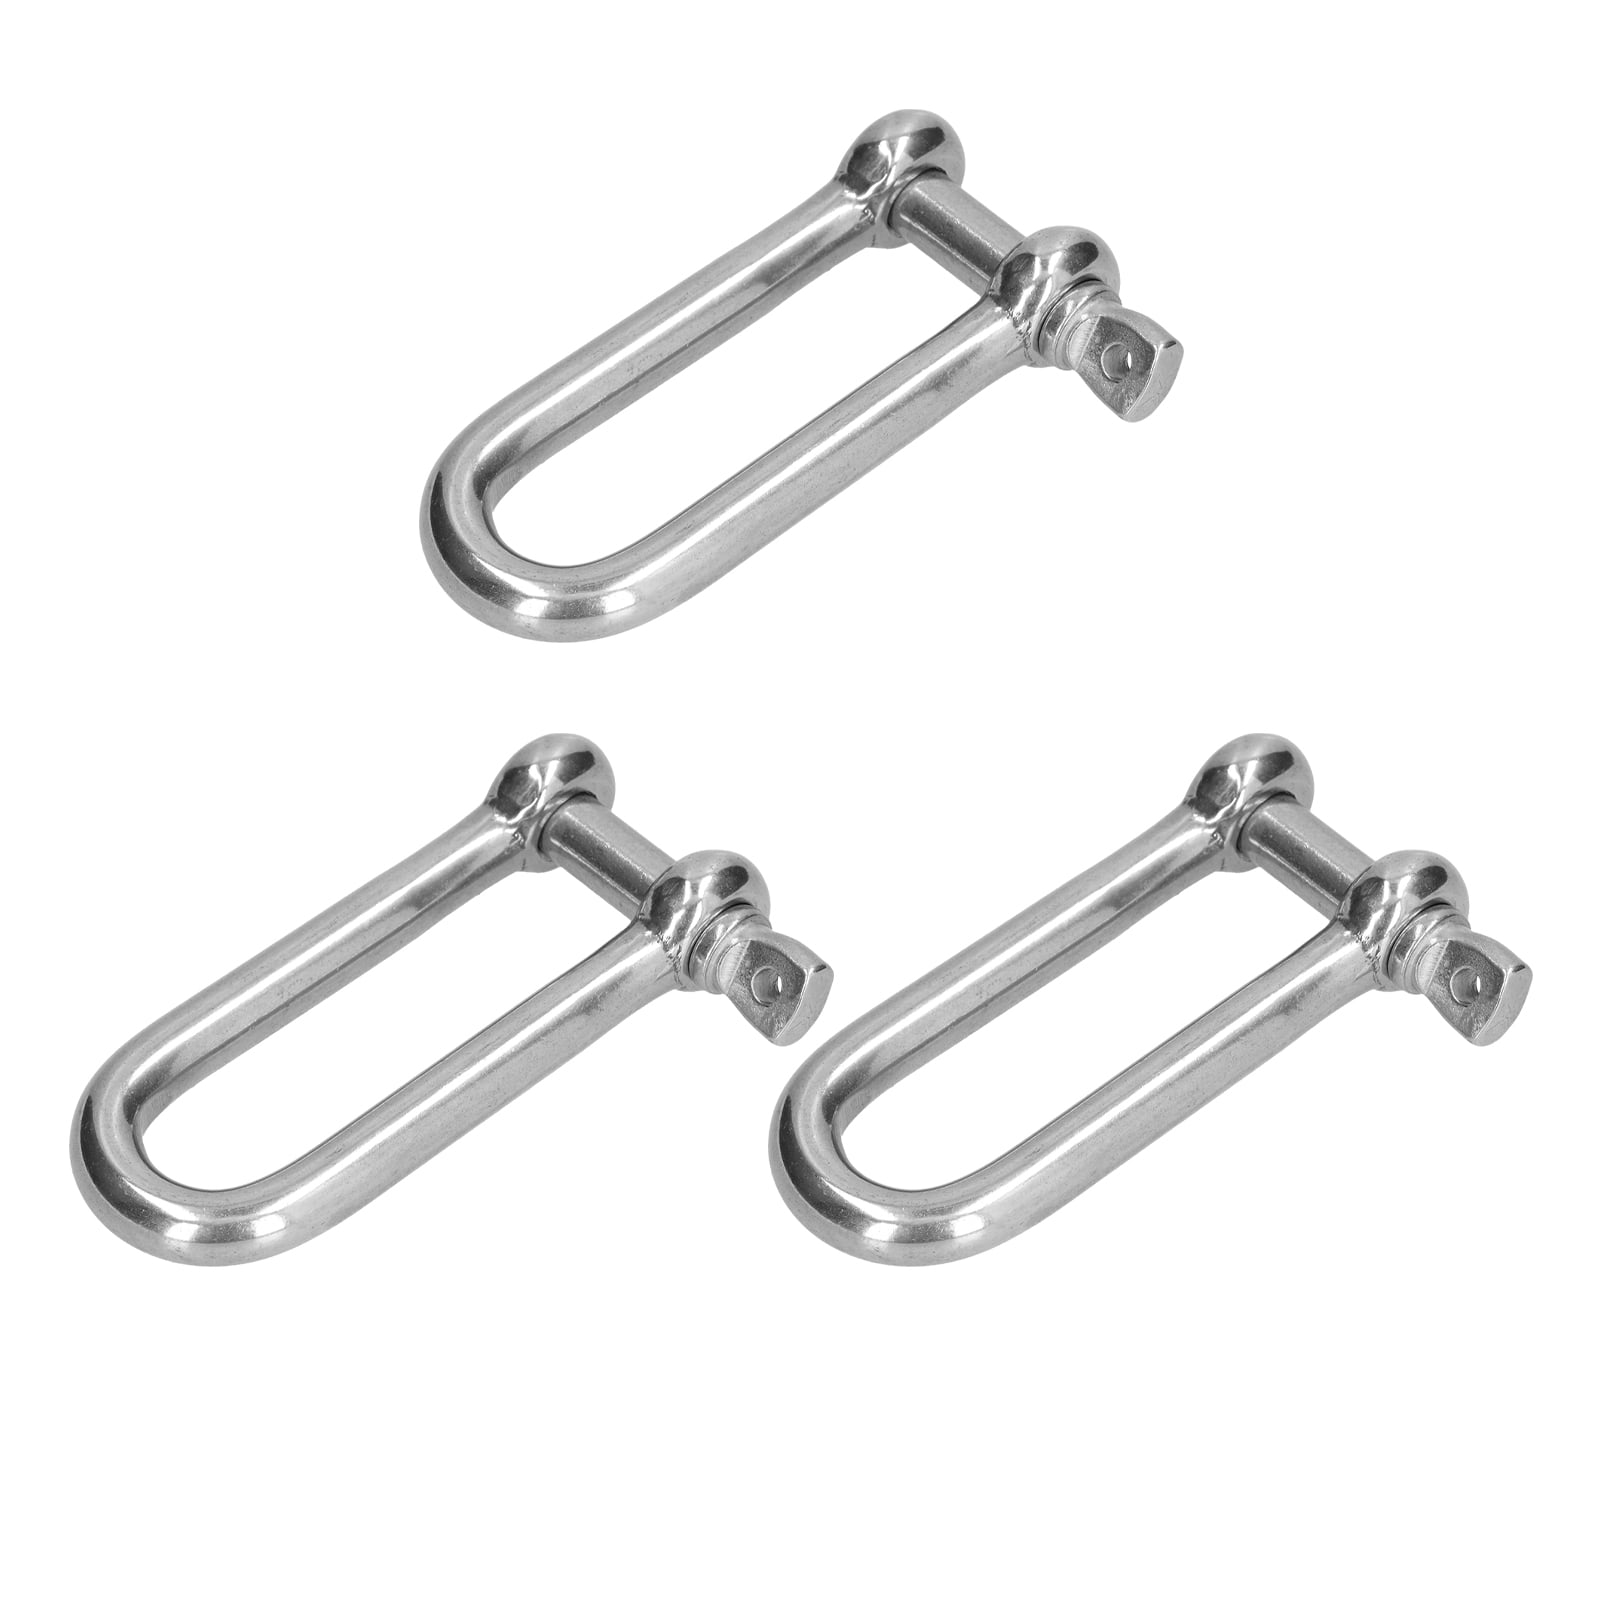 D Ring Shackle 3pcsM12 Stainless Steel Anchor Shackles Durable Straight Marine Grade for Railways for Machinery for Boat 